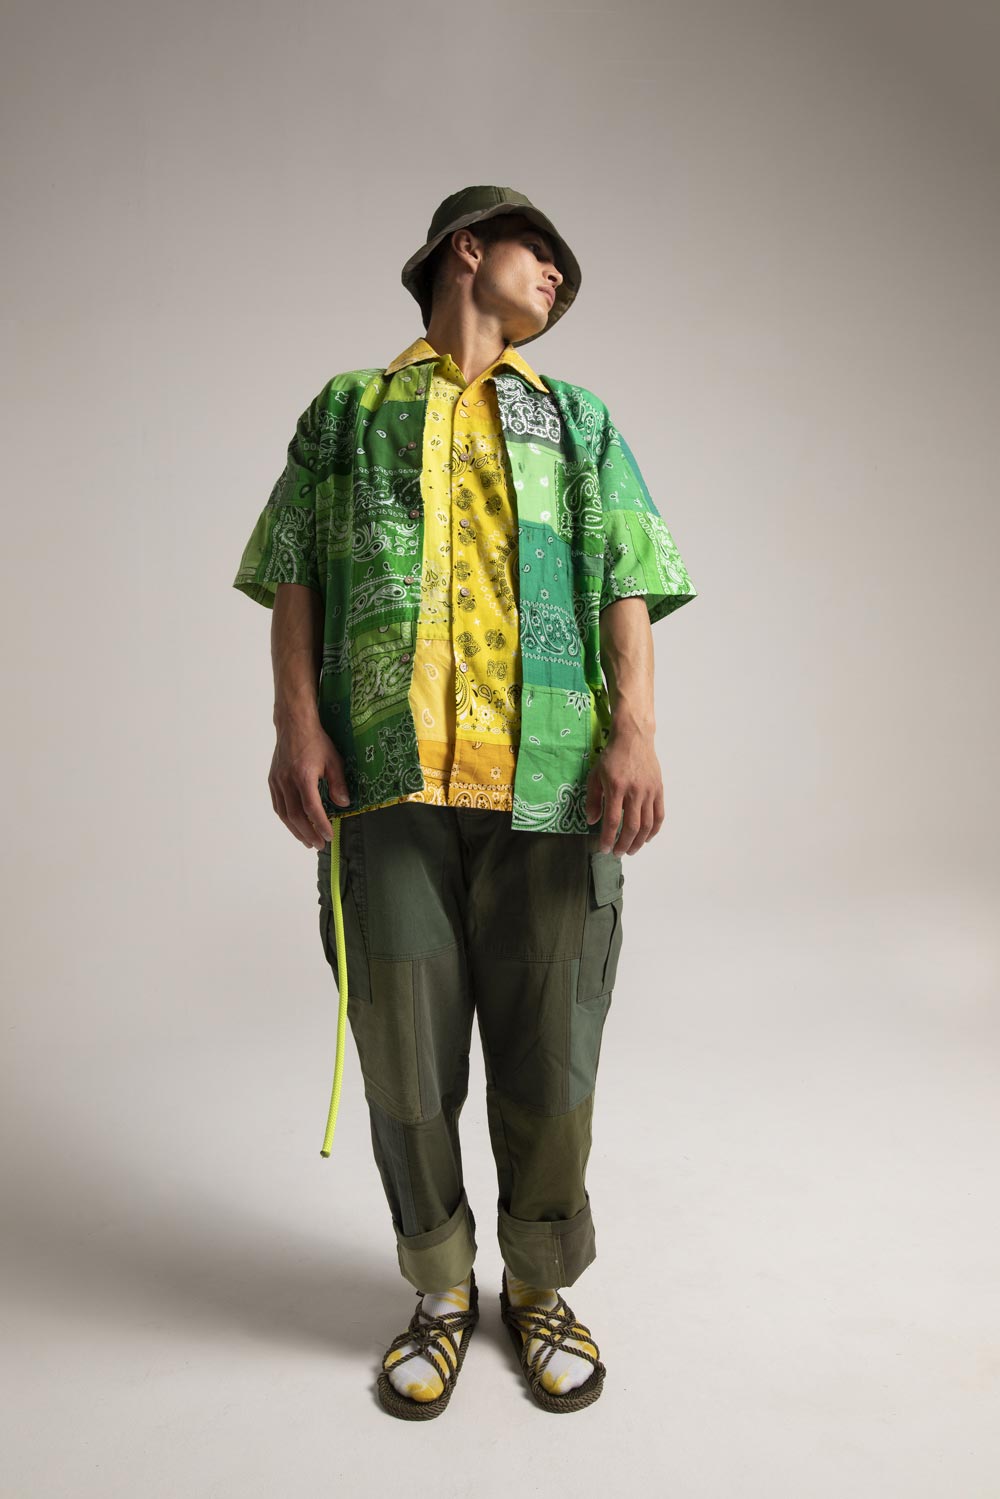  Green And Yellow Shirts // Military Patchwork Pant // Lining 65 Bob Hat